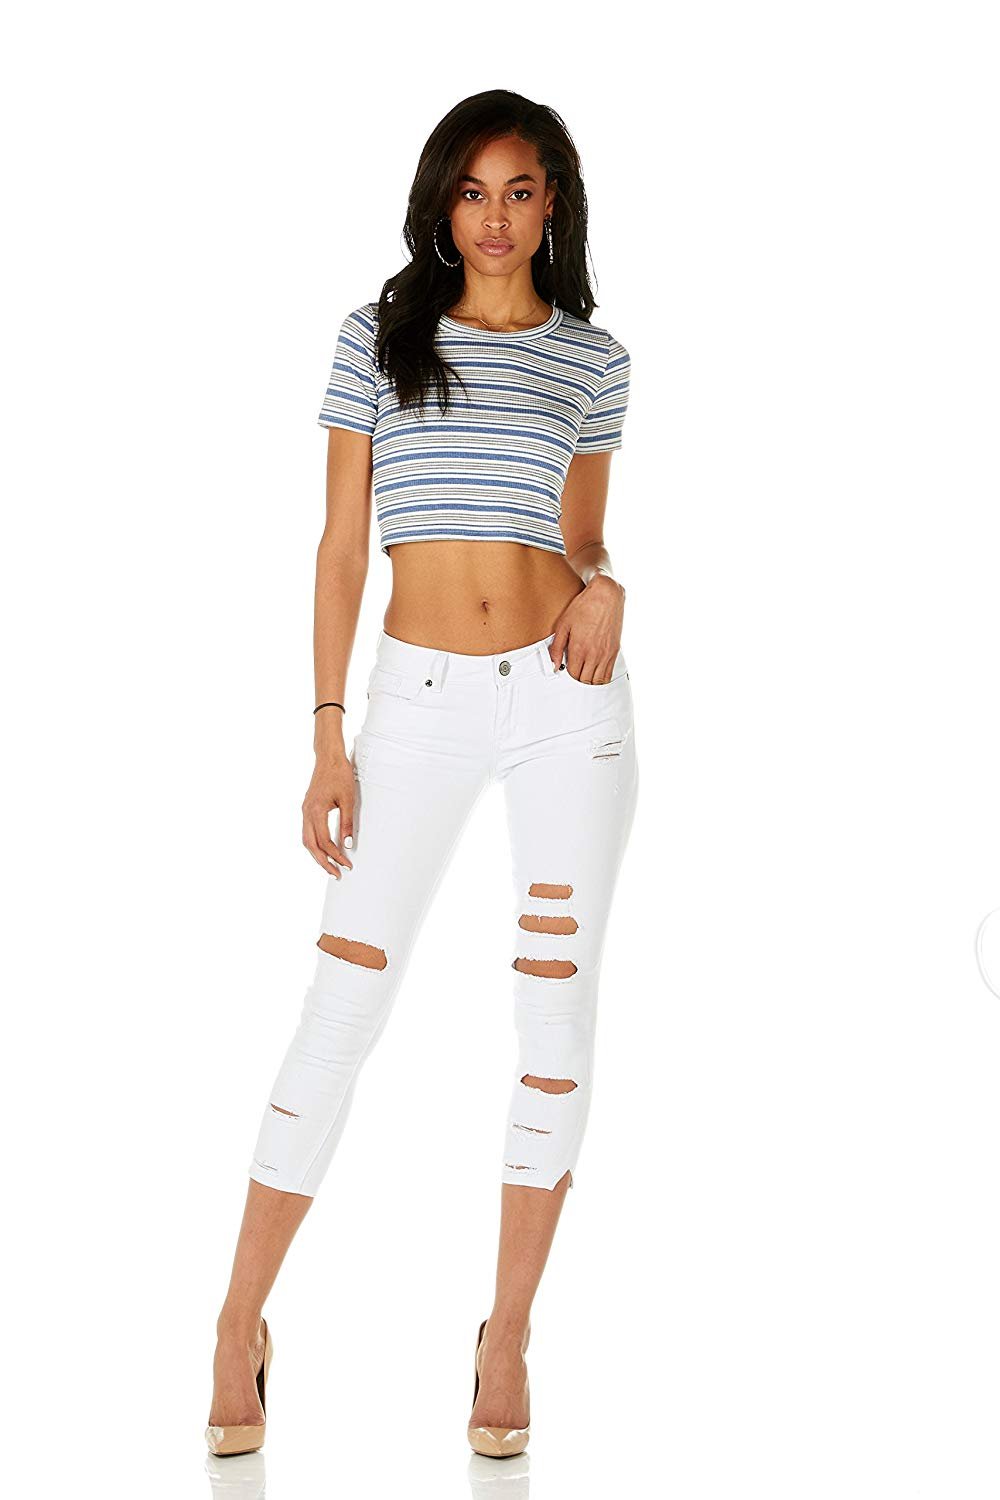 CG JEANS Plus Size Cute Juniors Big Mid Rise Large Ripped Torn Crop Skinny Fit, White Denim 22 - image 5 of 7